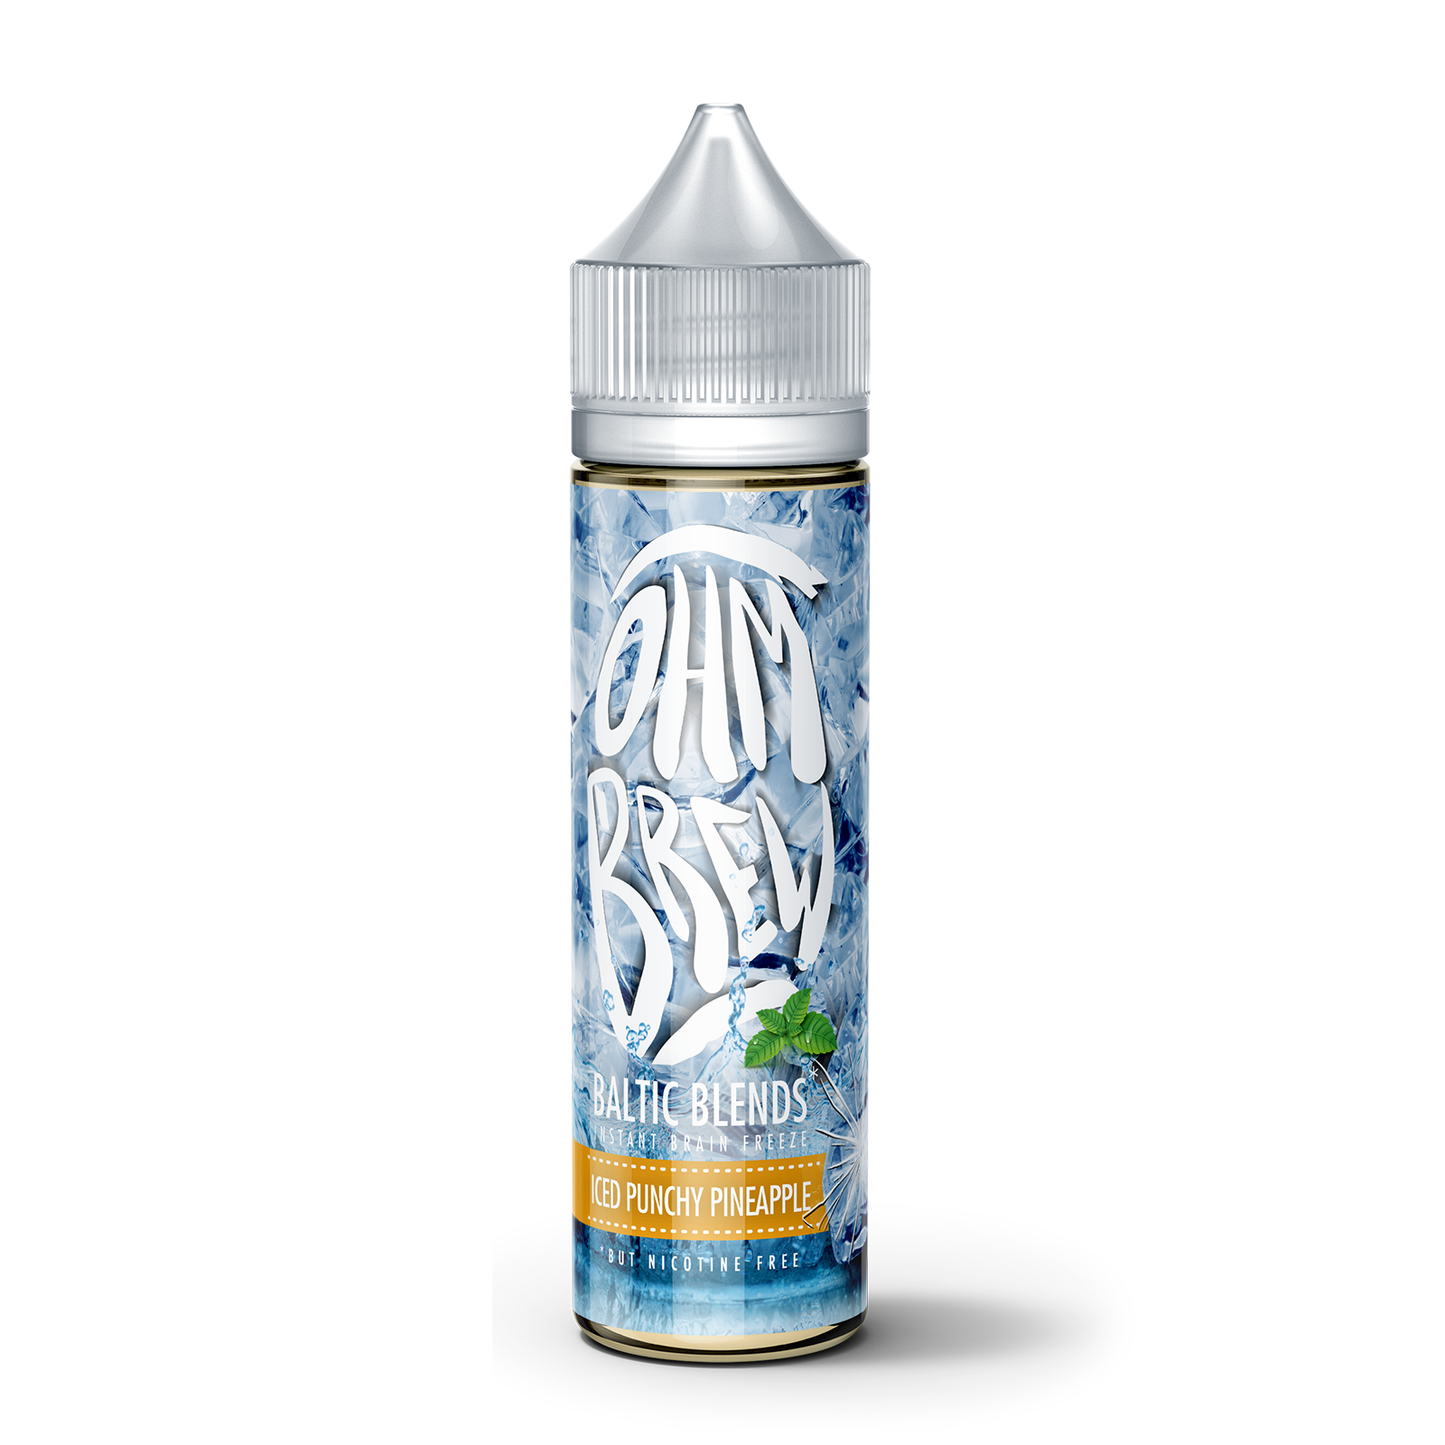 Ohm Brew Baltic Blends Iced Punchy Pineapple - 50ml